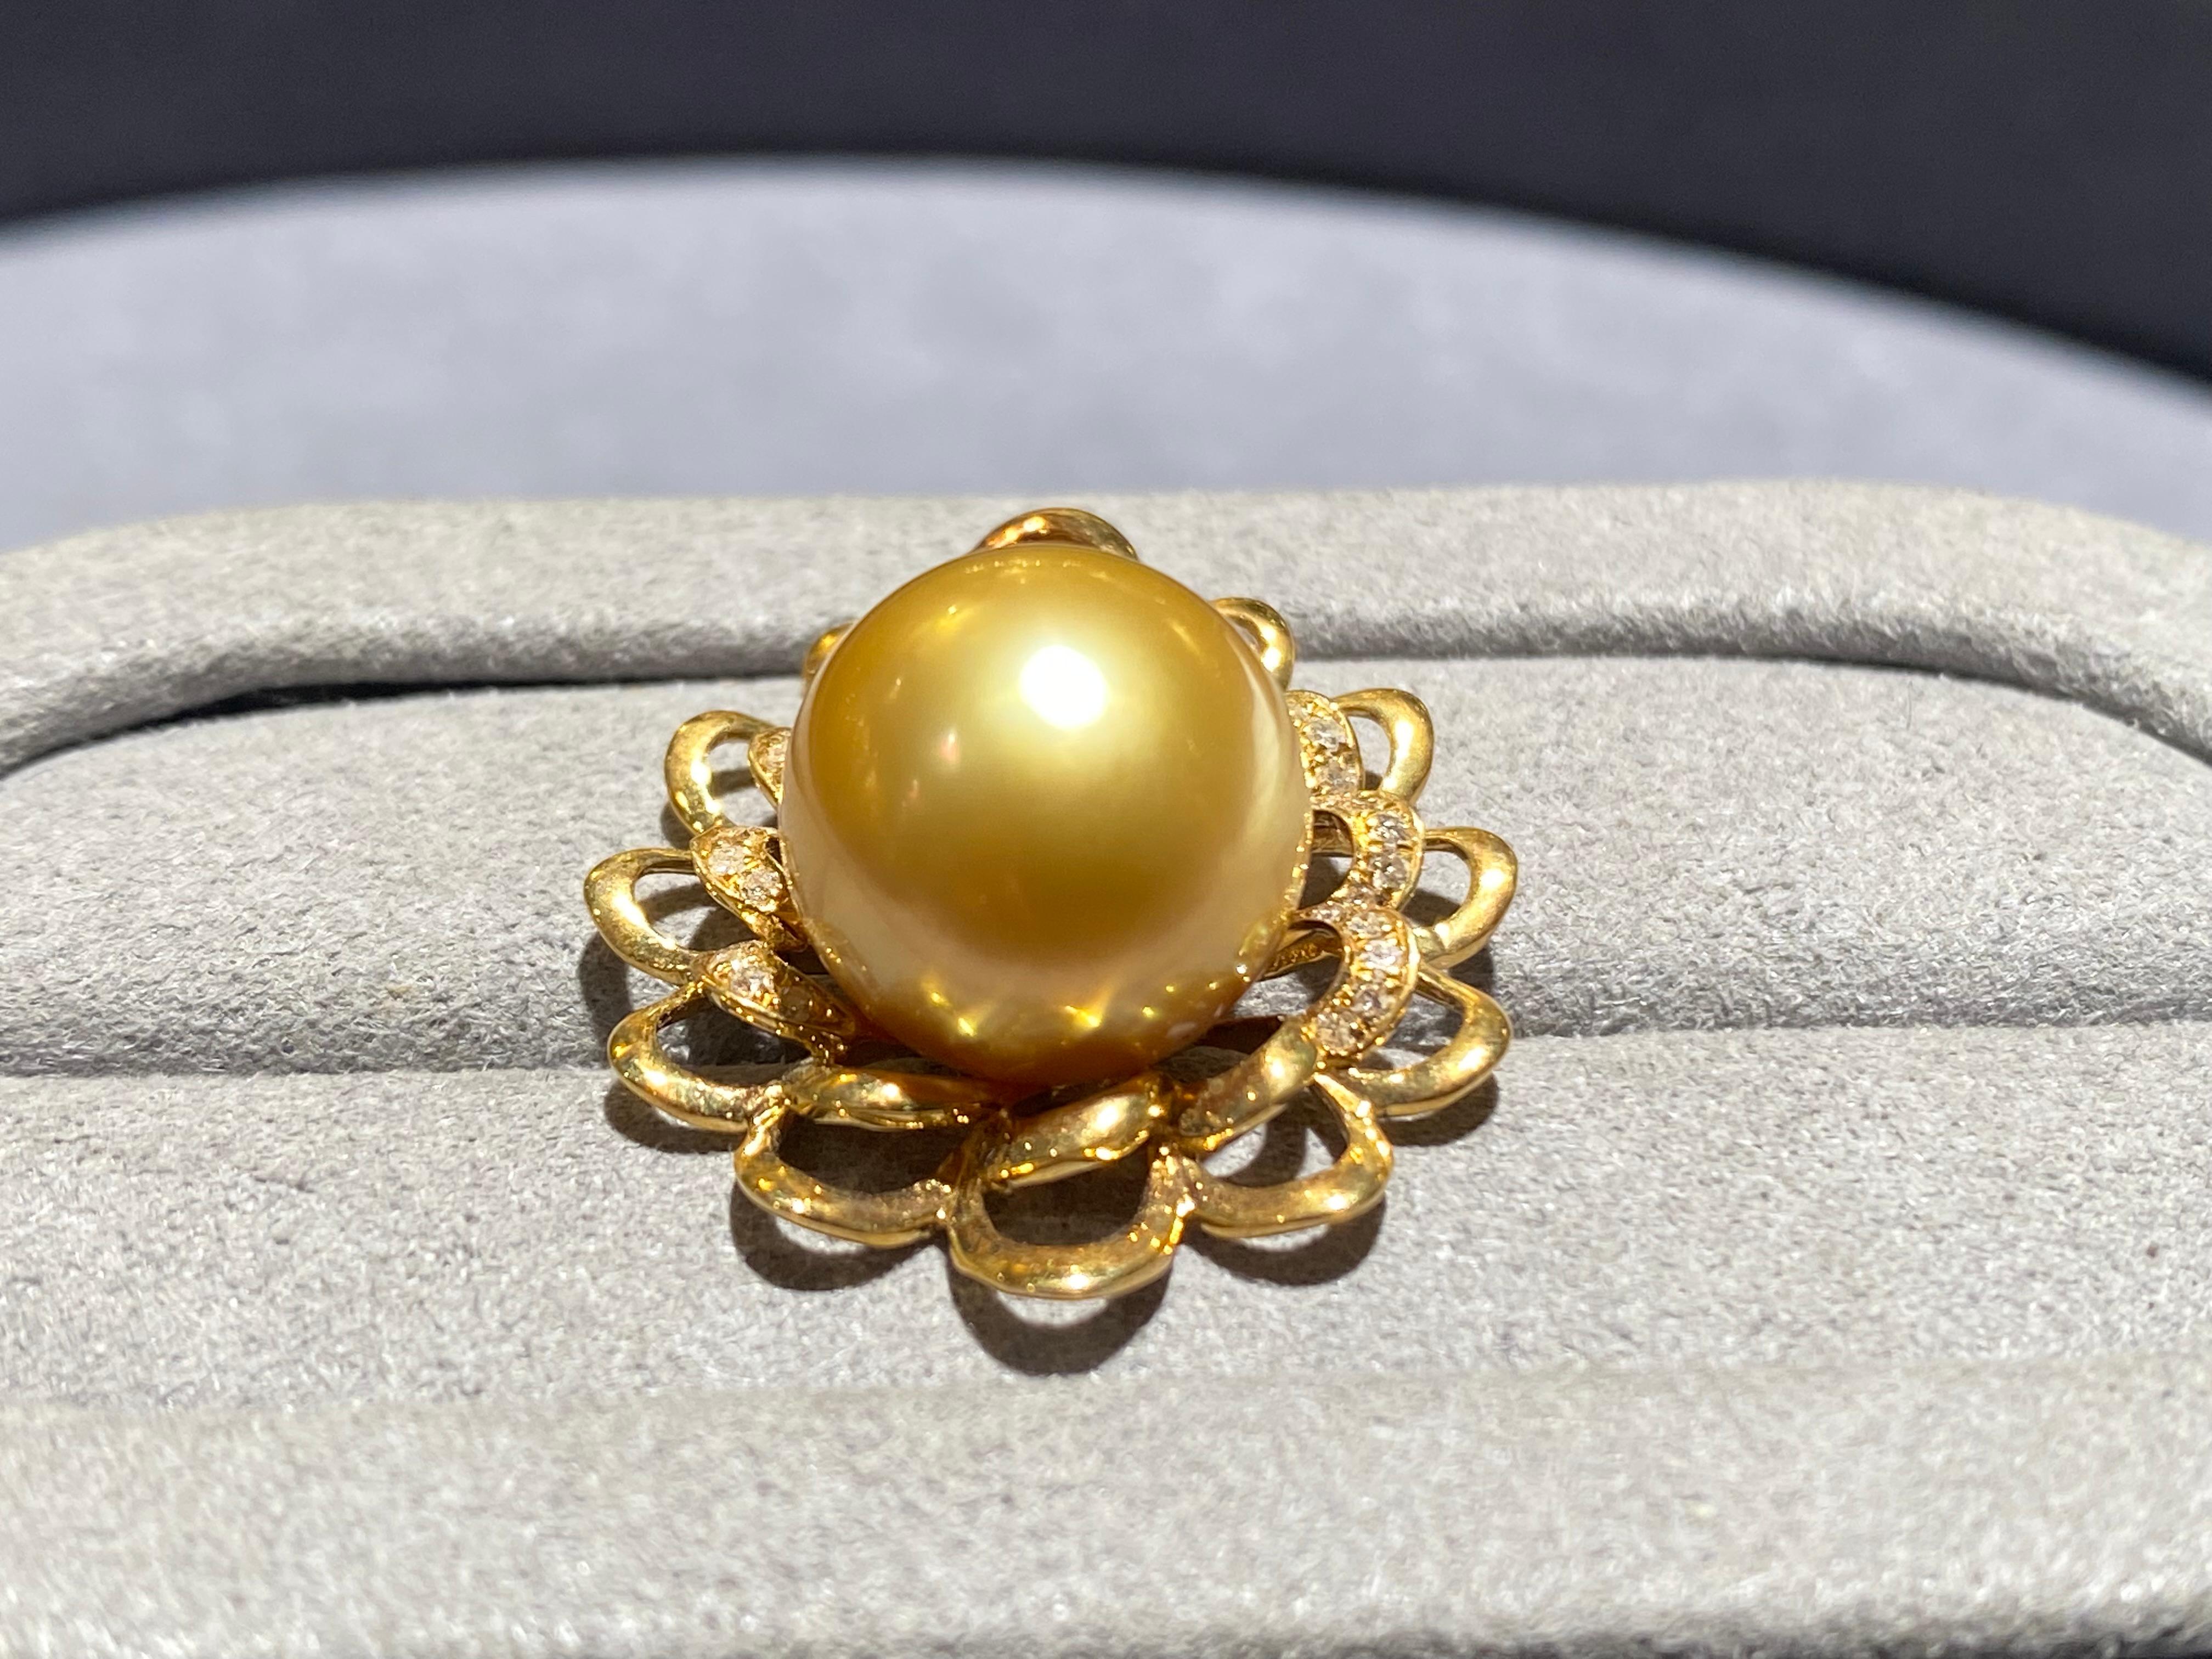 A 12.4 mm deep golden colour south sea pearl and diamond pendant in 18k yellow gold. It is a floral design pendant with the south sea pearl sitting in the middle with diamond pave surrounded it. The south sea pearl is round in shape. The pearl is